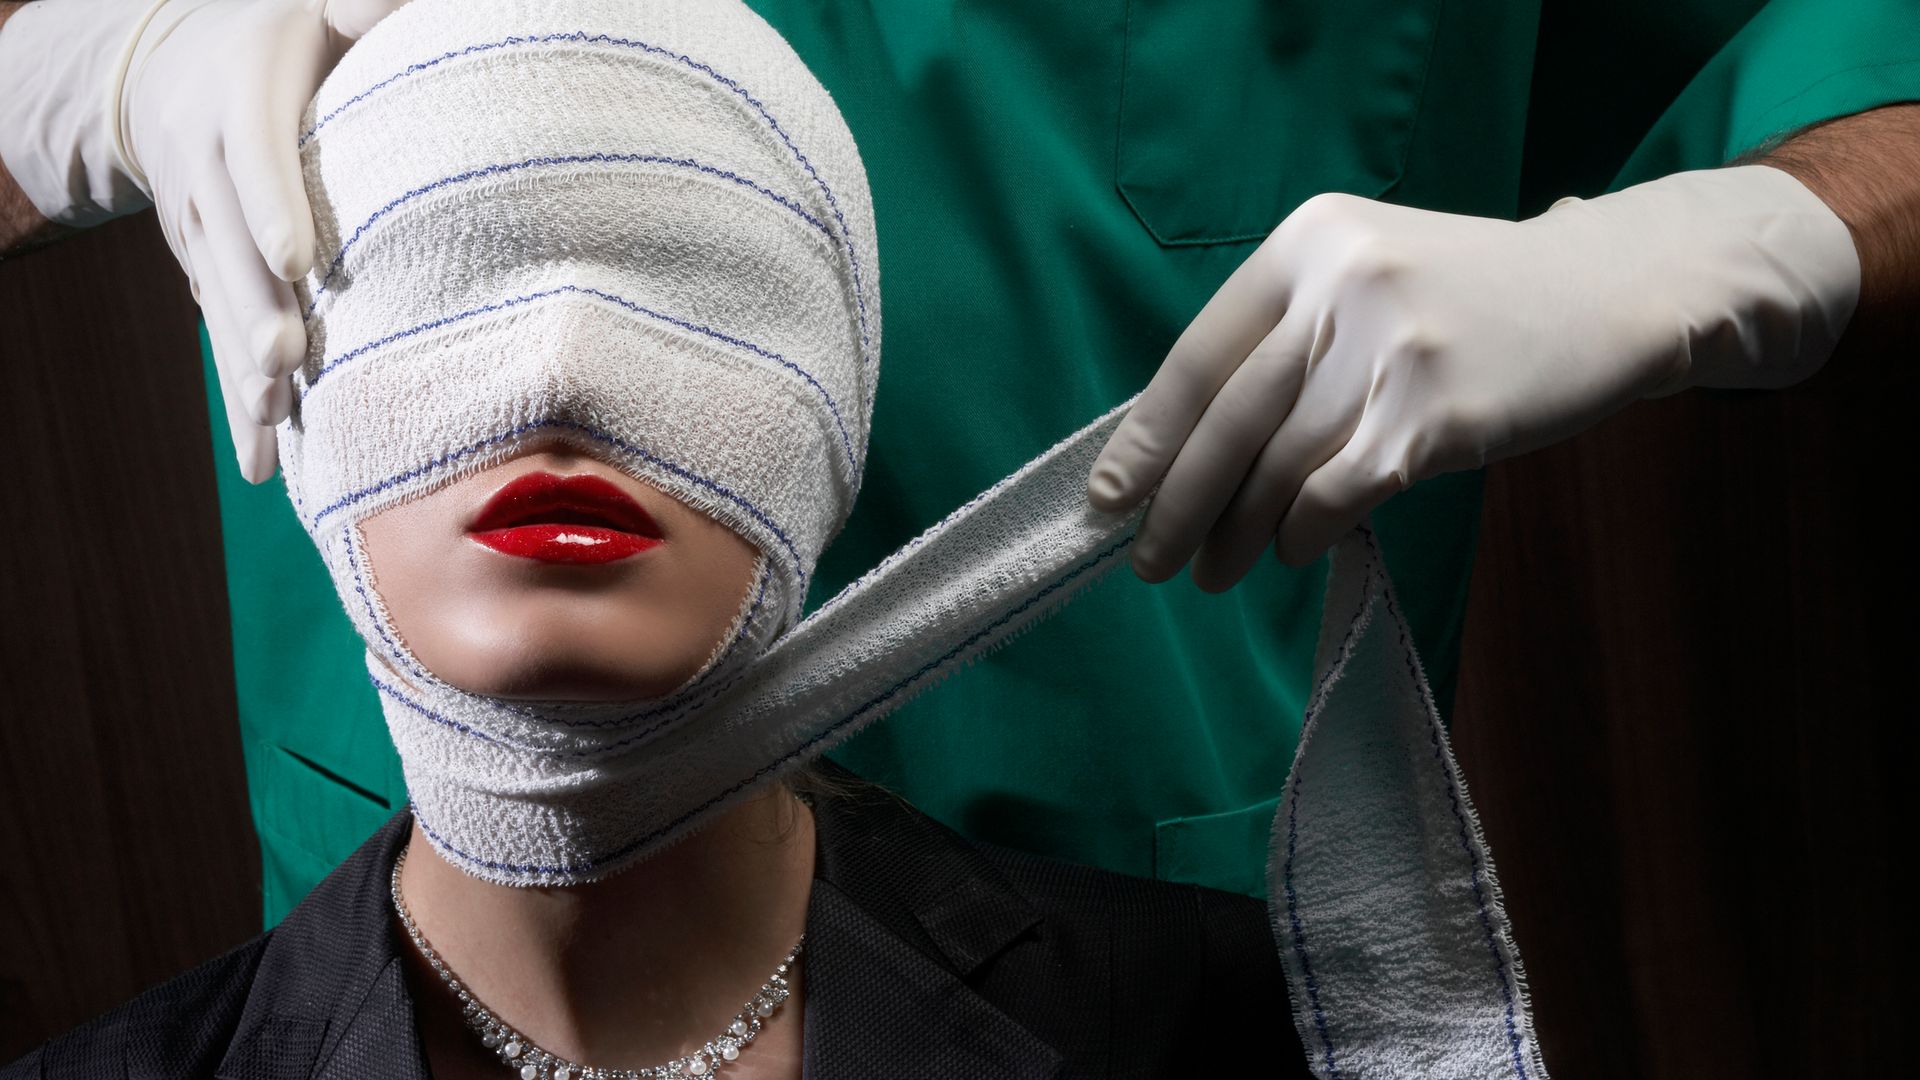 'Why are so many of us Brits flying to Turkey for plastic surgery?'